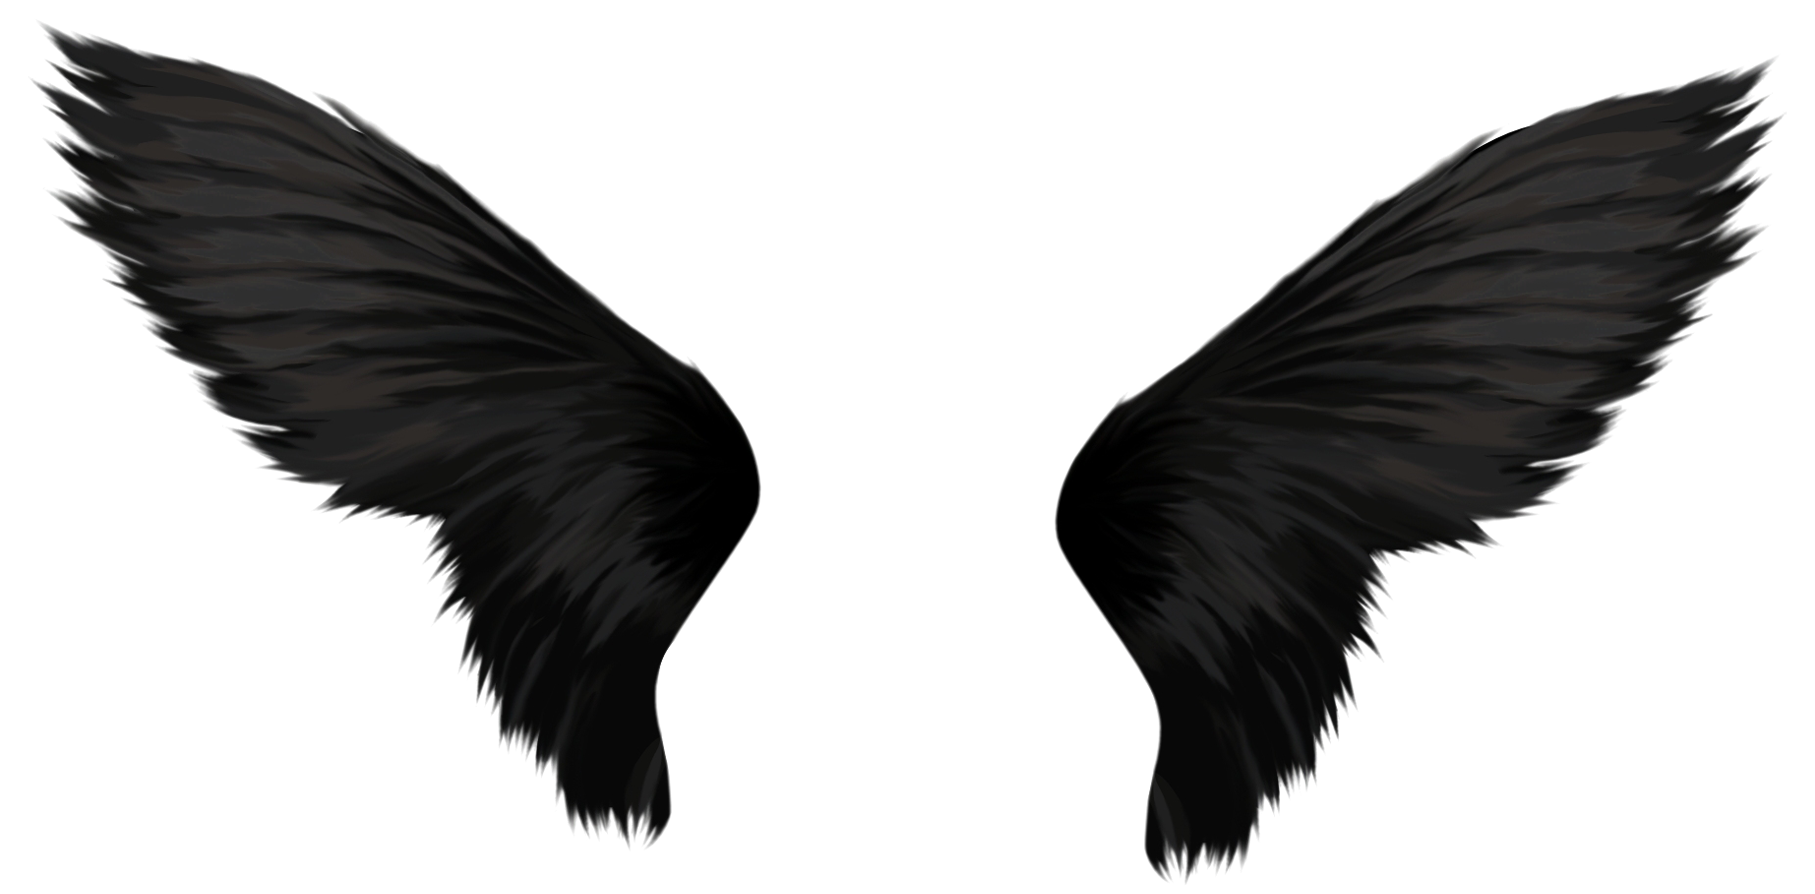 Wing PNG Photos